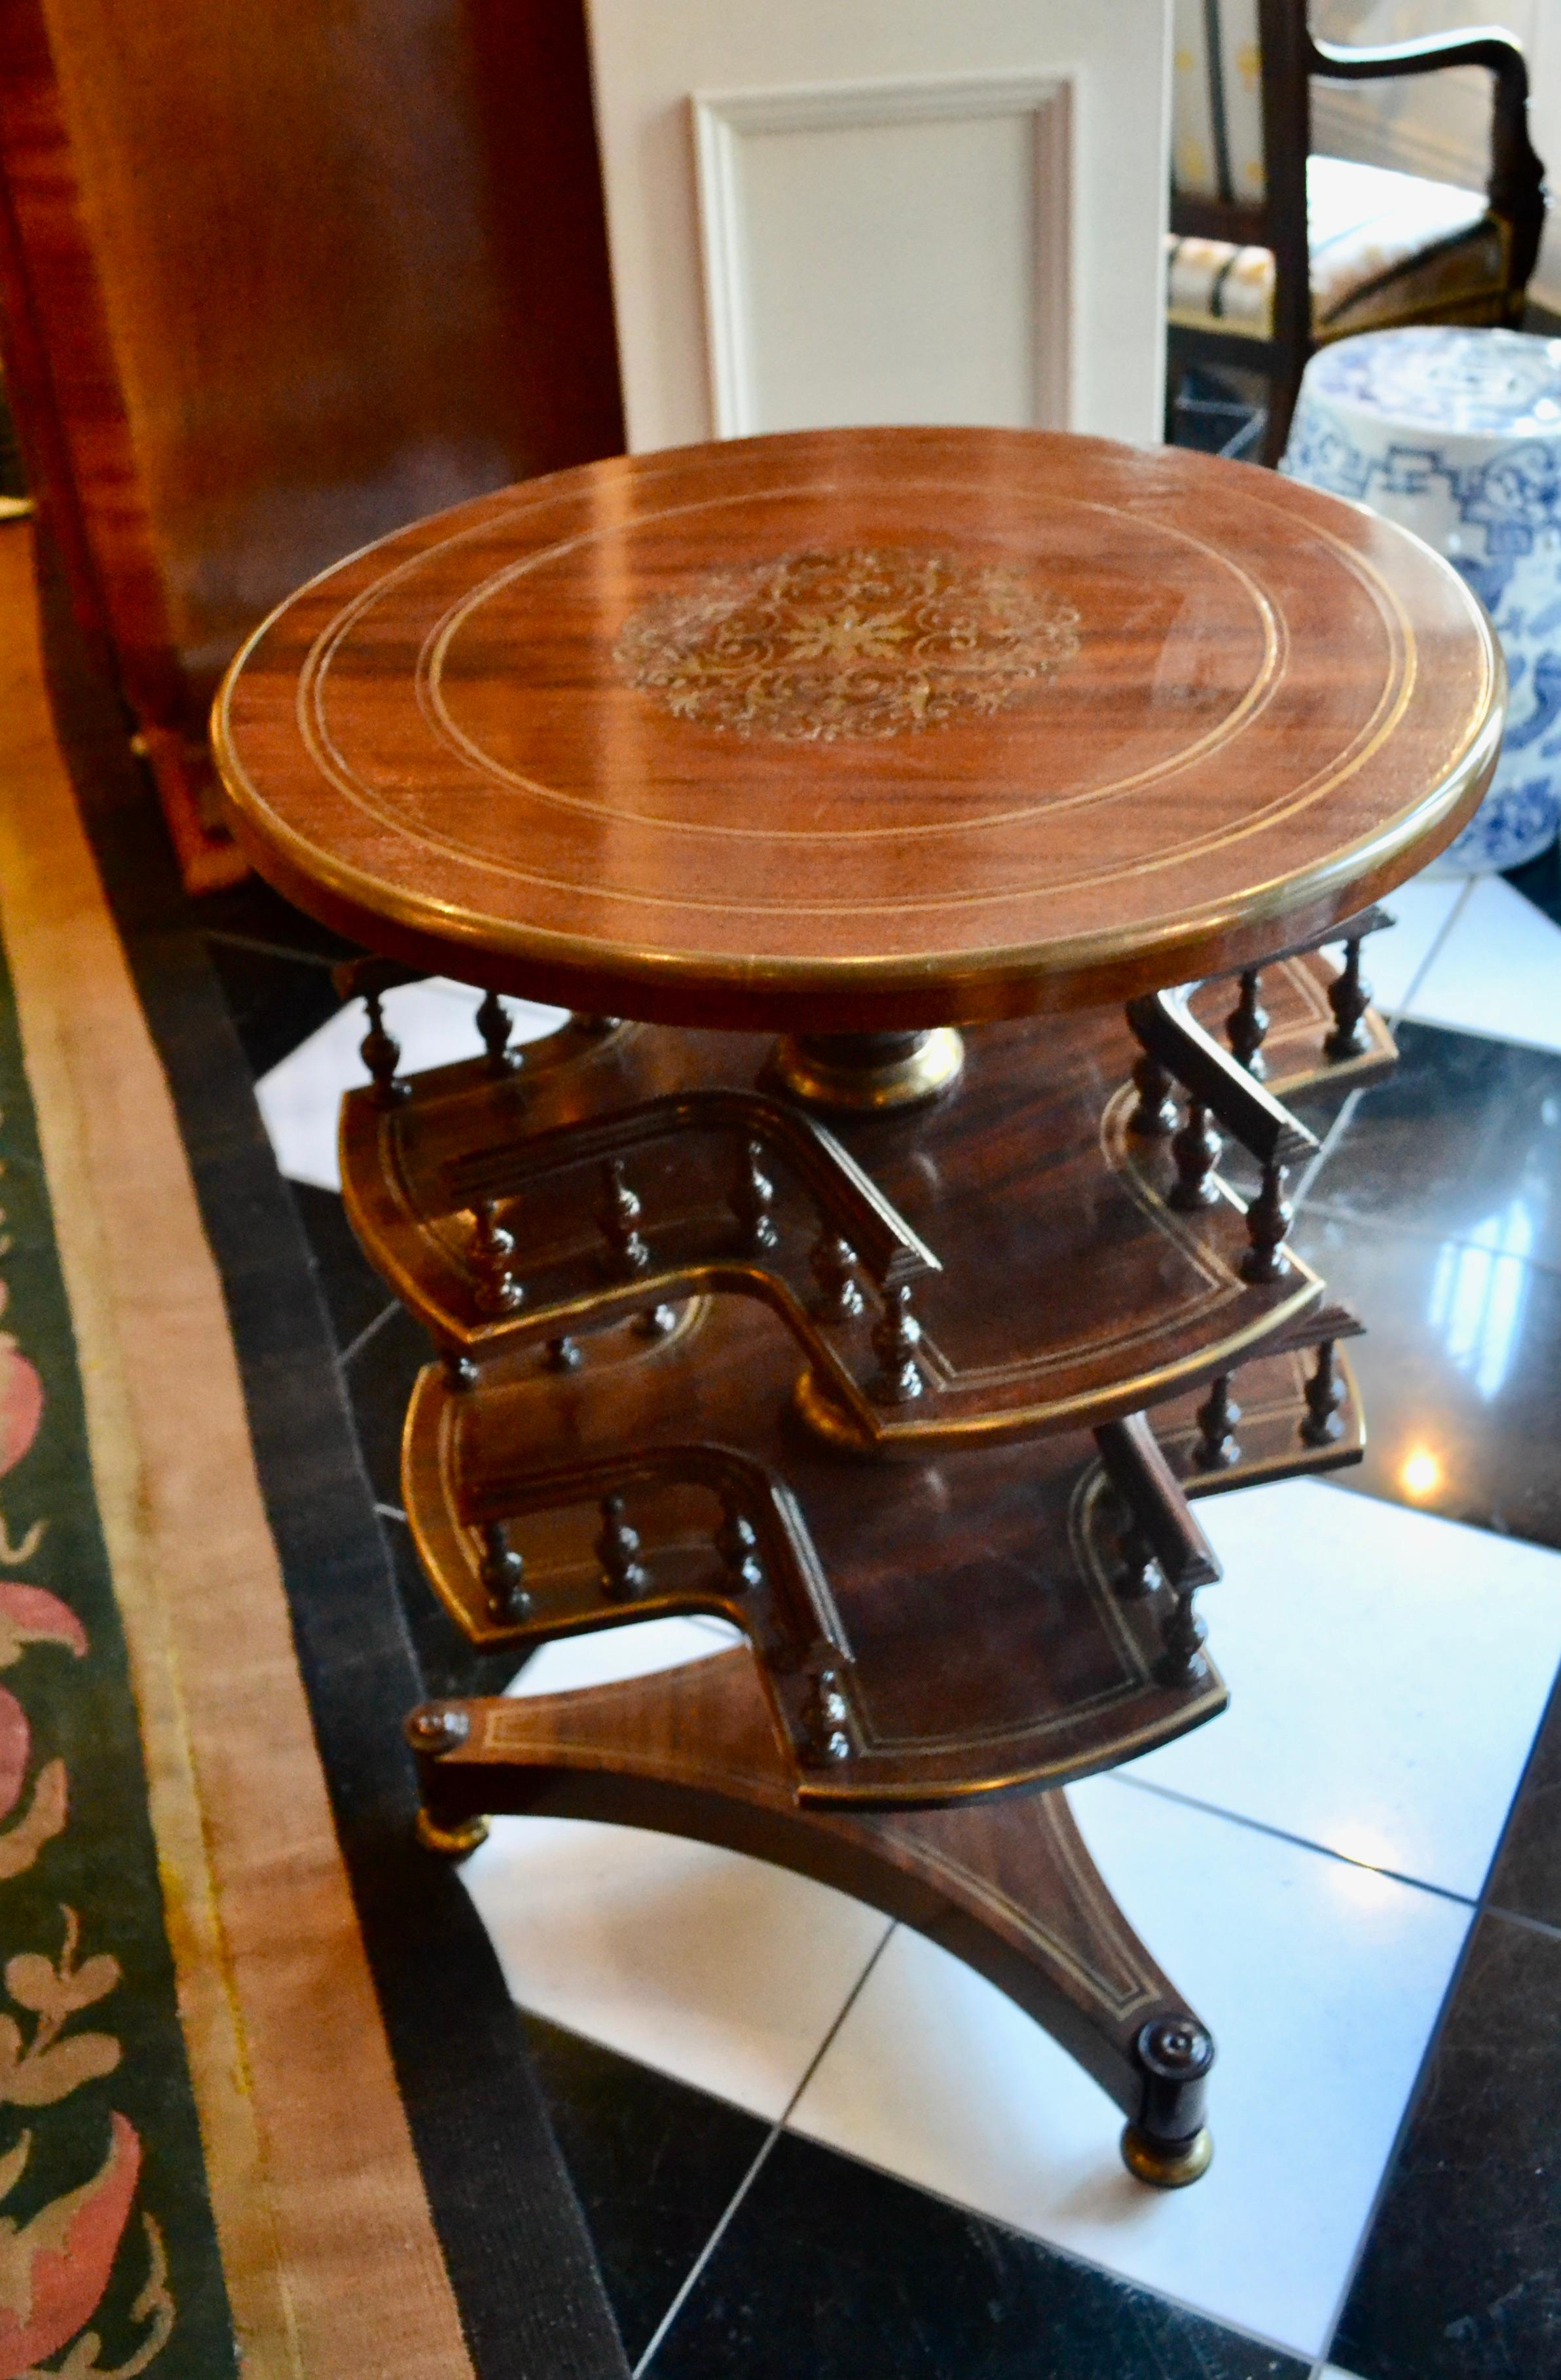 19th Century Regency Style English Carousel Table In Good Condition For Sale In Vancouver, British Columbia